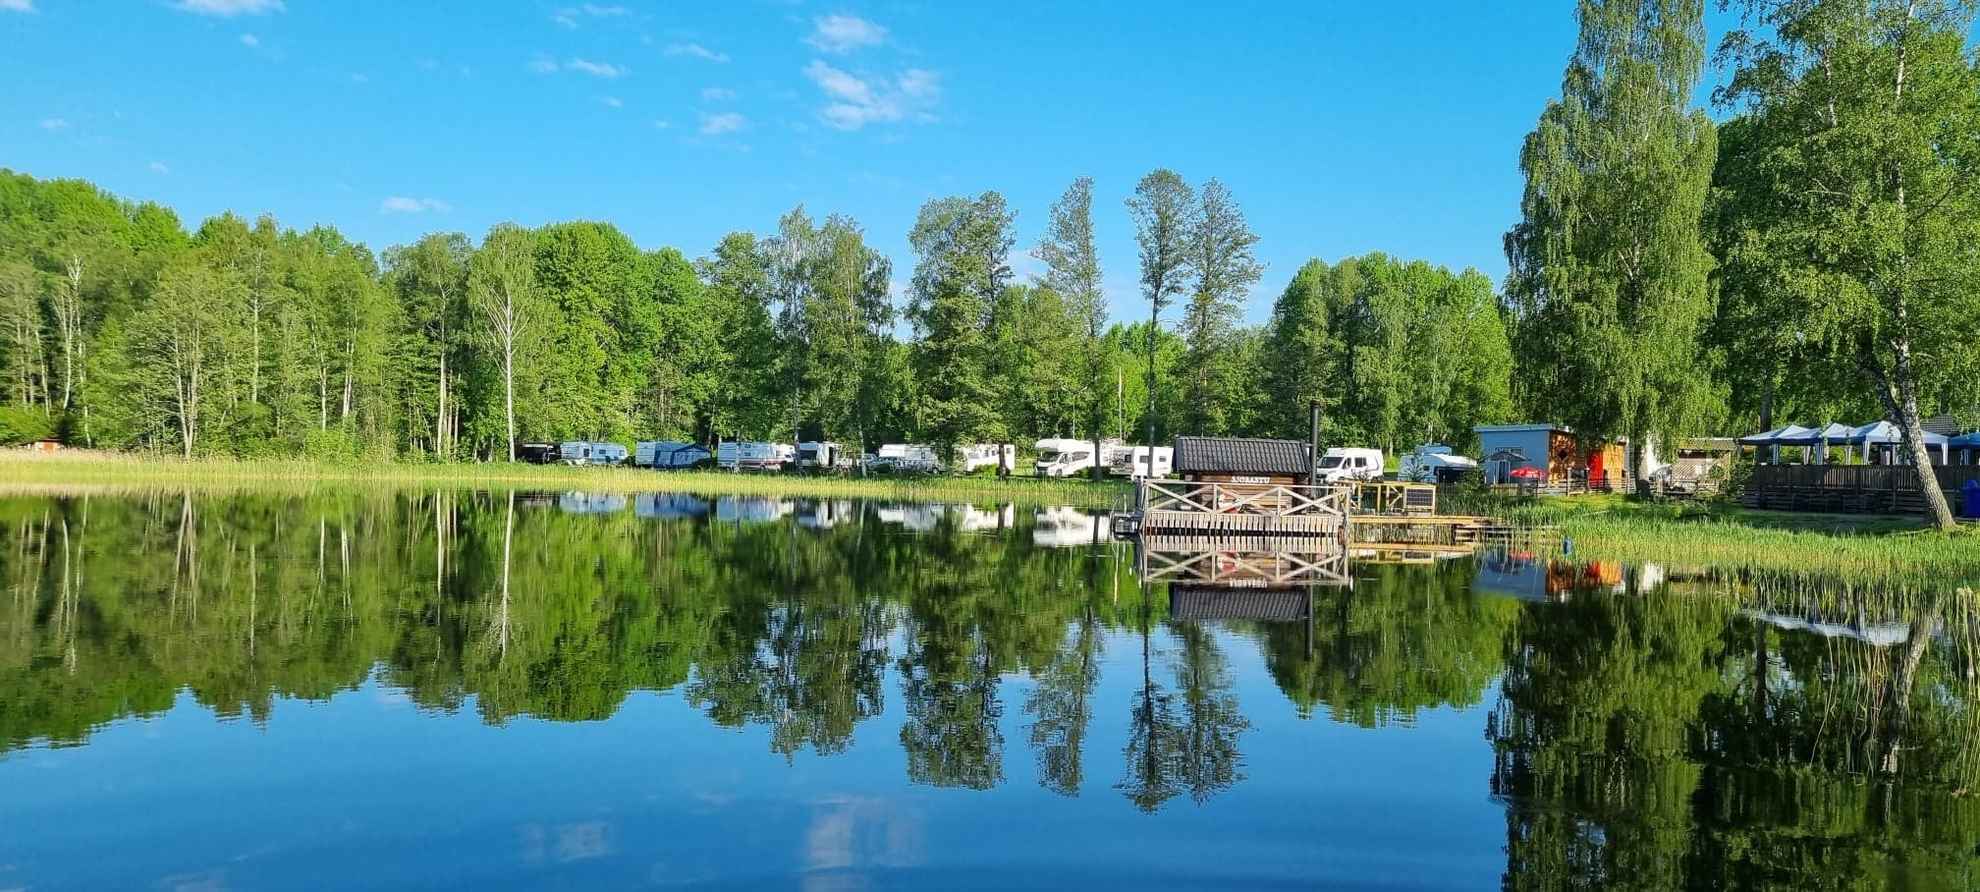 The water in Lake Nossen reflects the surrounding greenery and the mobile homes parked next to the water.